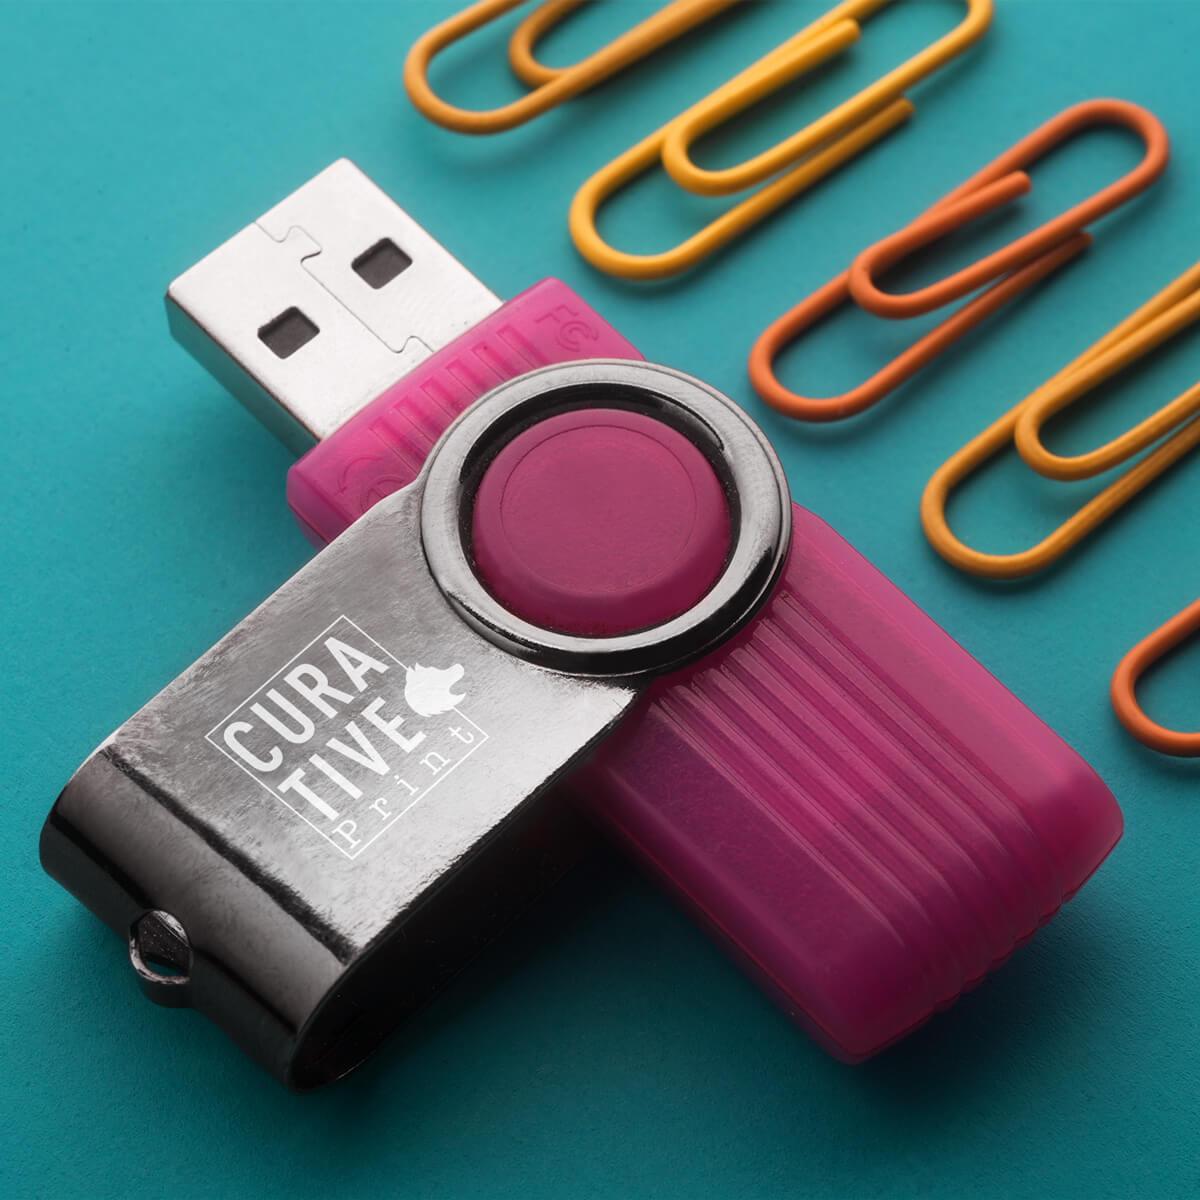 Paper clips laying next to a purple USB flash drive promotional technology by curative printing